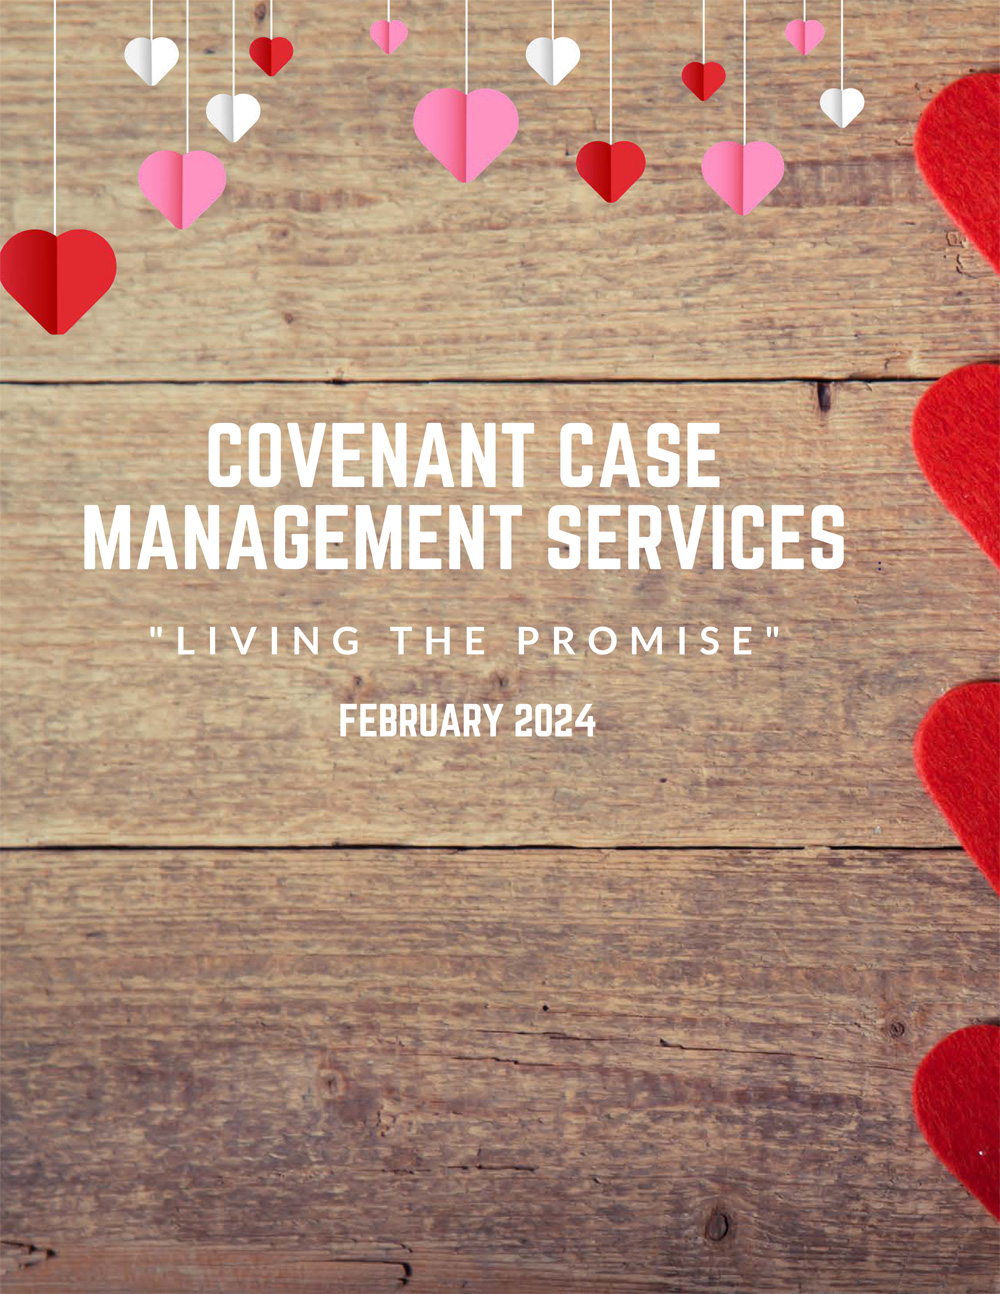 February 2024 Newsletter from Covenant Case Management Services